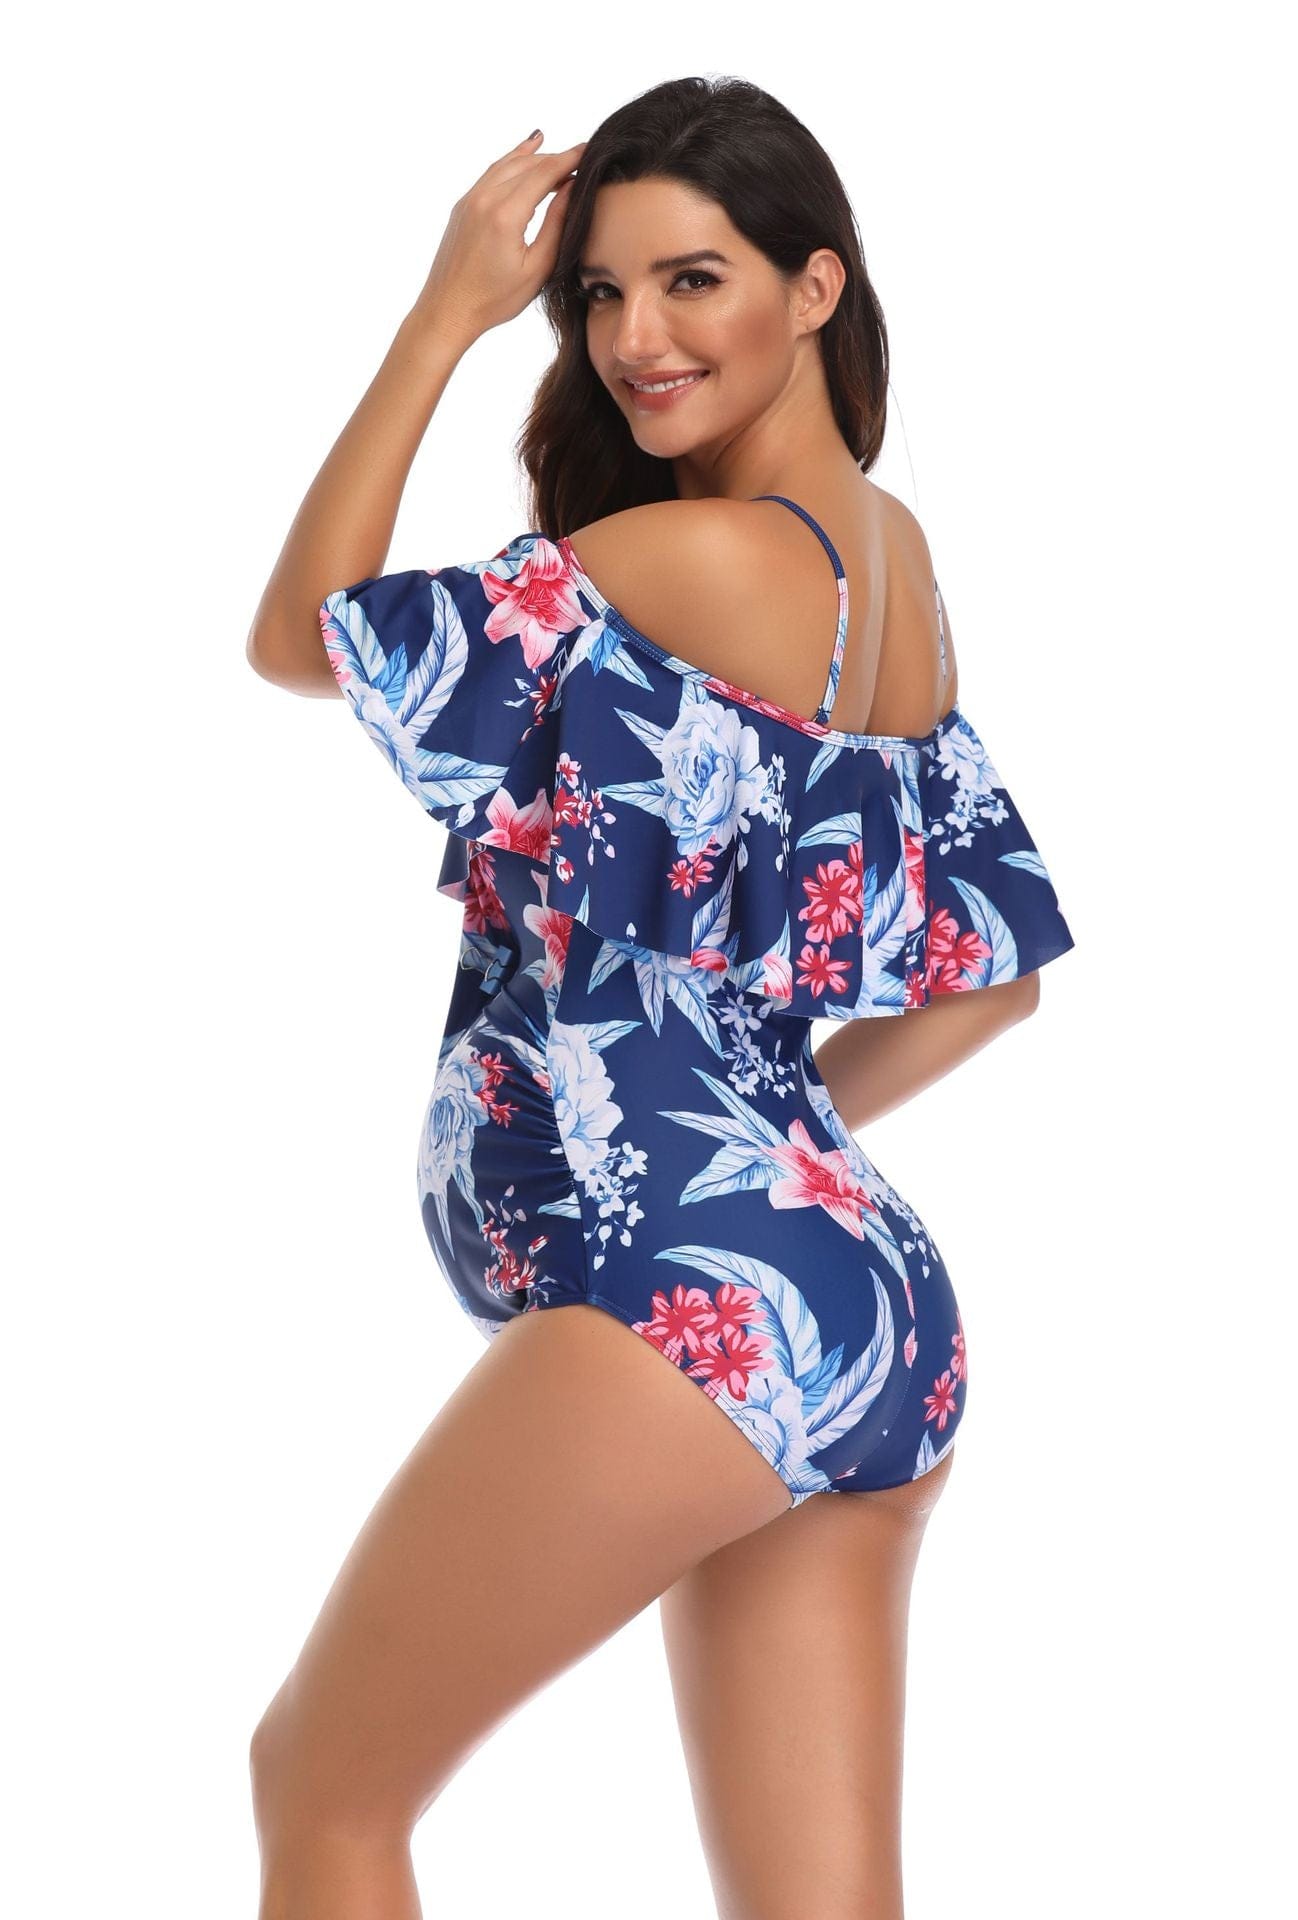 Expertly Designed Blue Maternity Bathing Suit: Stylish Ruffles and Floral Accent 